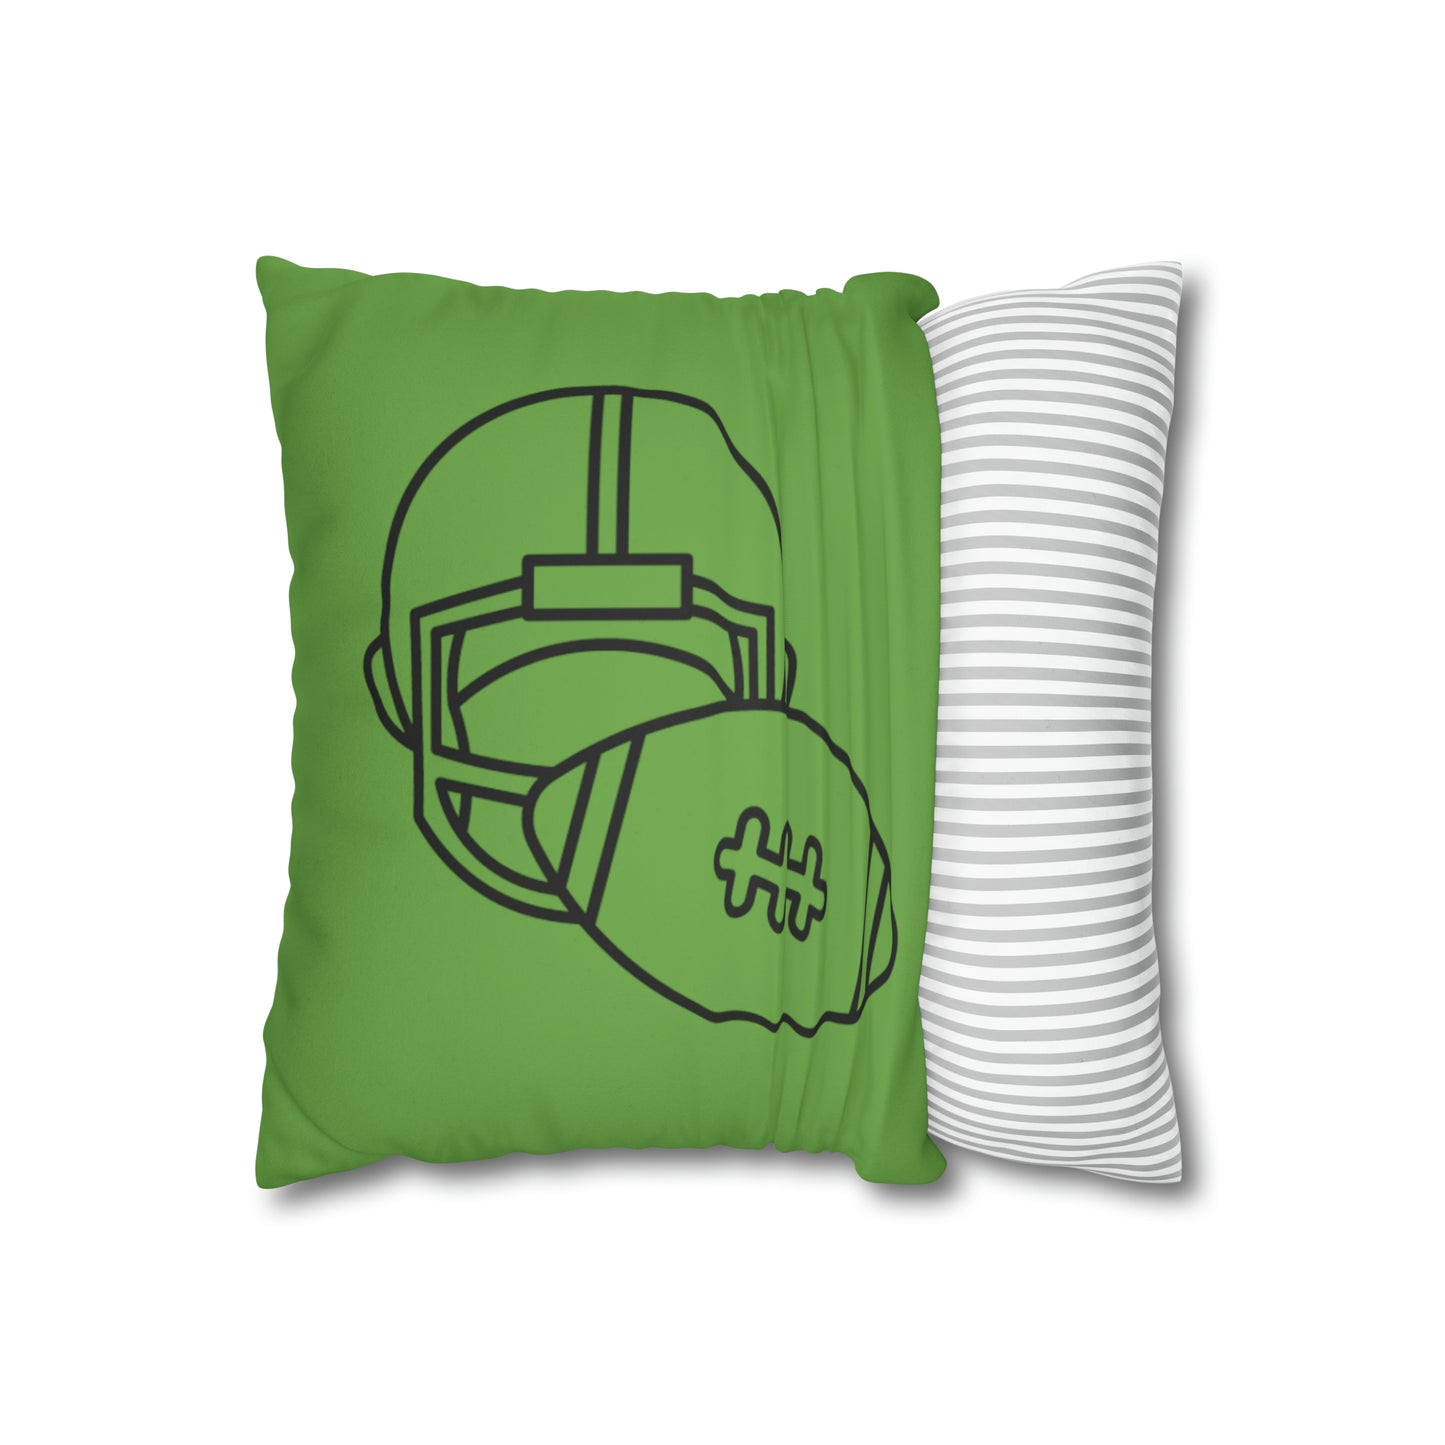 Faux Suede Square Pillow Case: Football Green